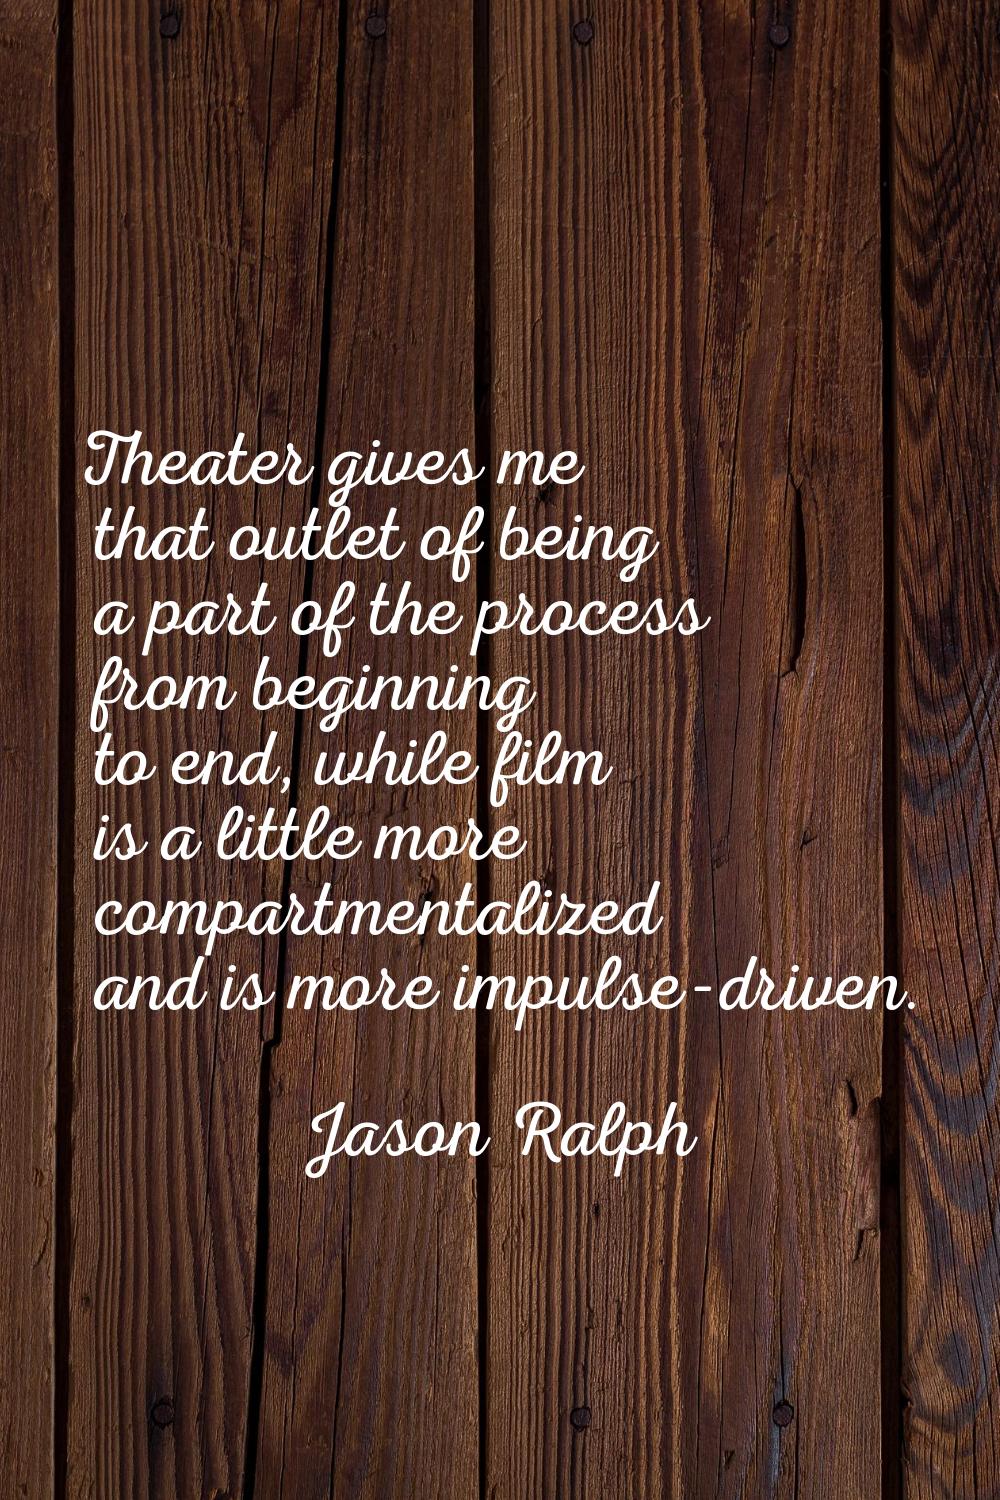 Theater gives me that outlet of being a part of the process from beginning to end, while film is a 